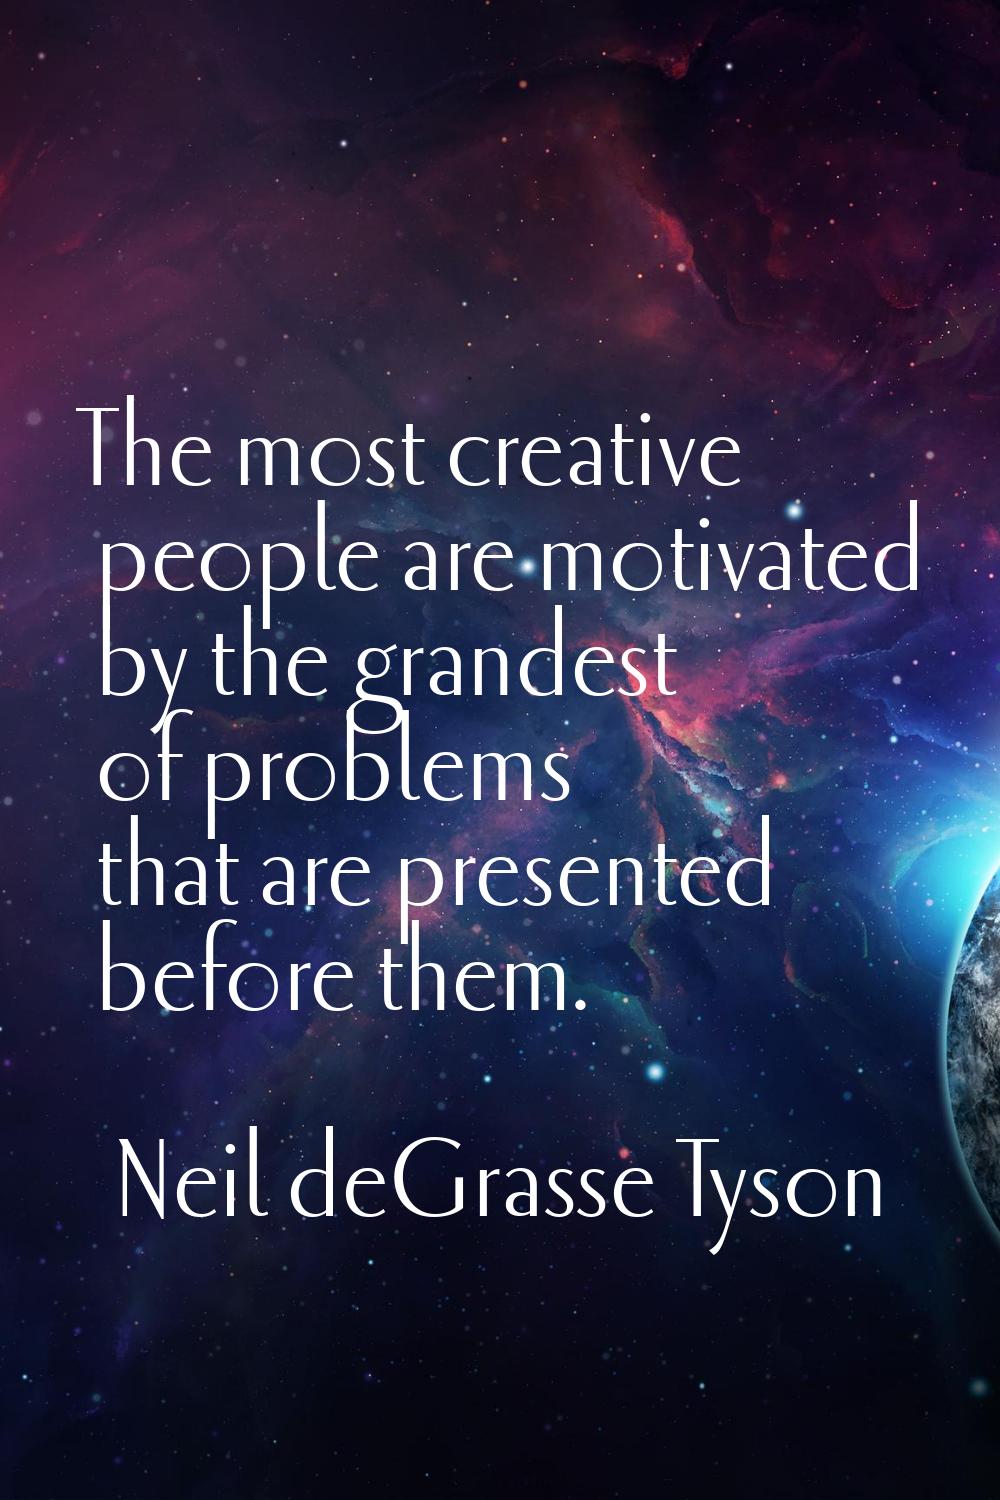 The most creative people are motivated by the grandest of problems that are presented before them.